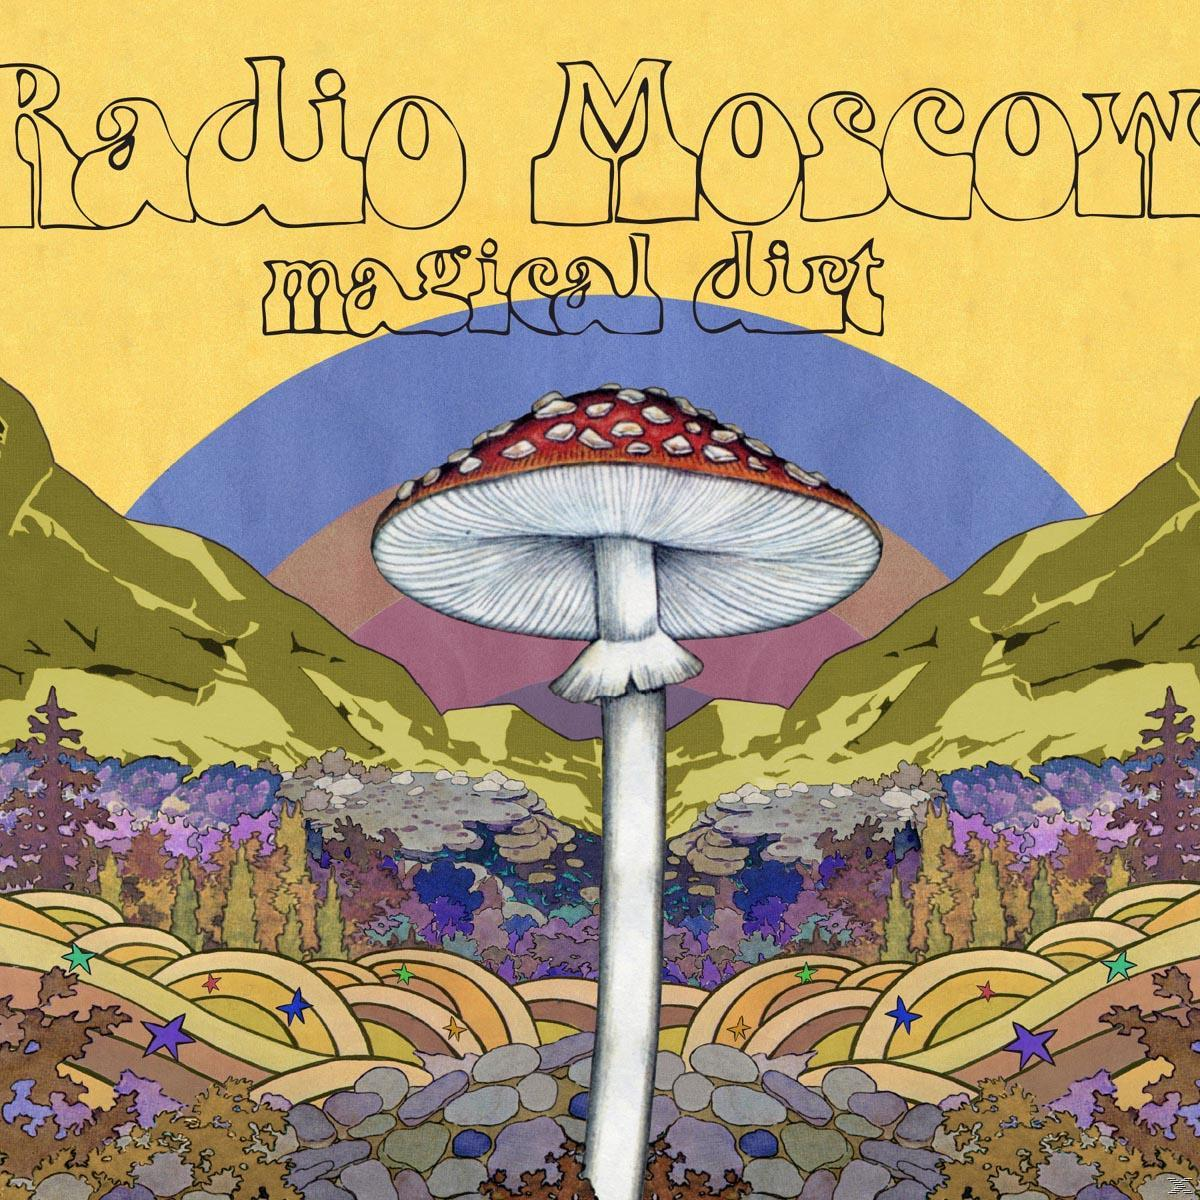 - (CD) Radio Dirt - Moscow Magical